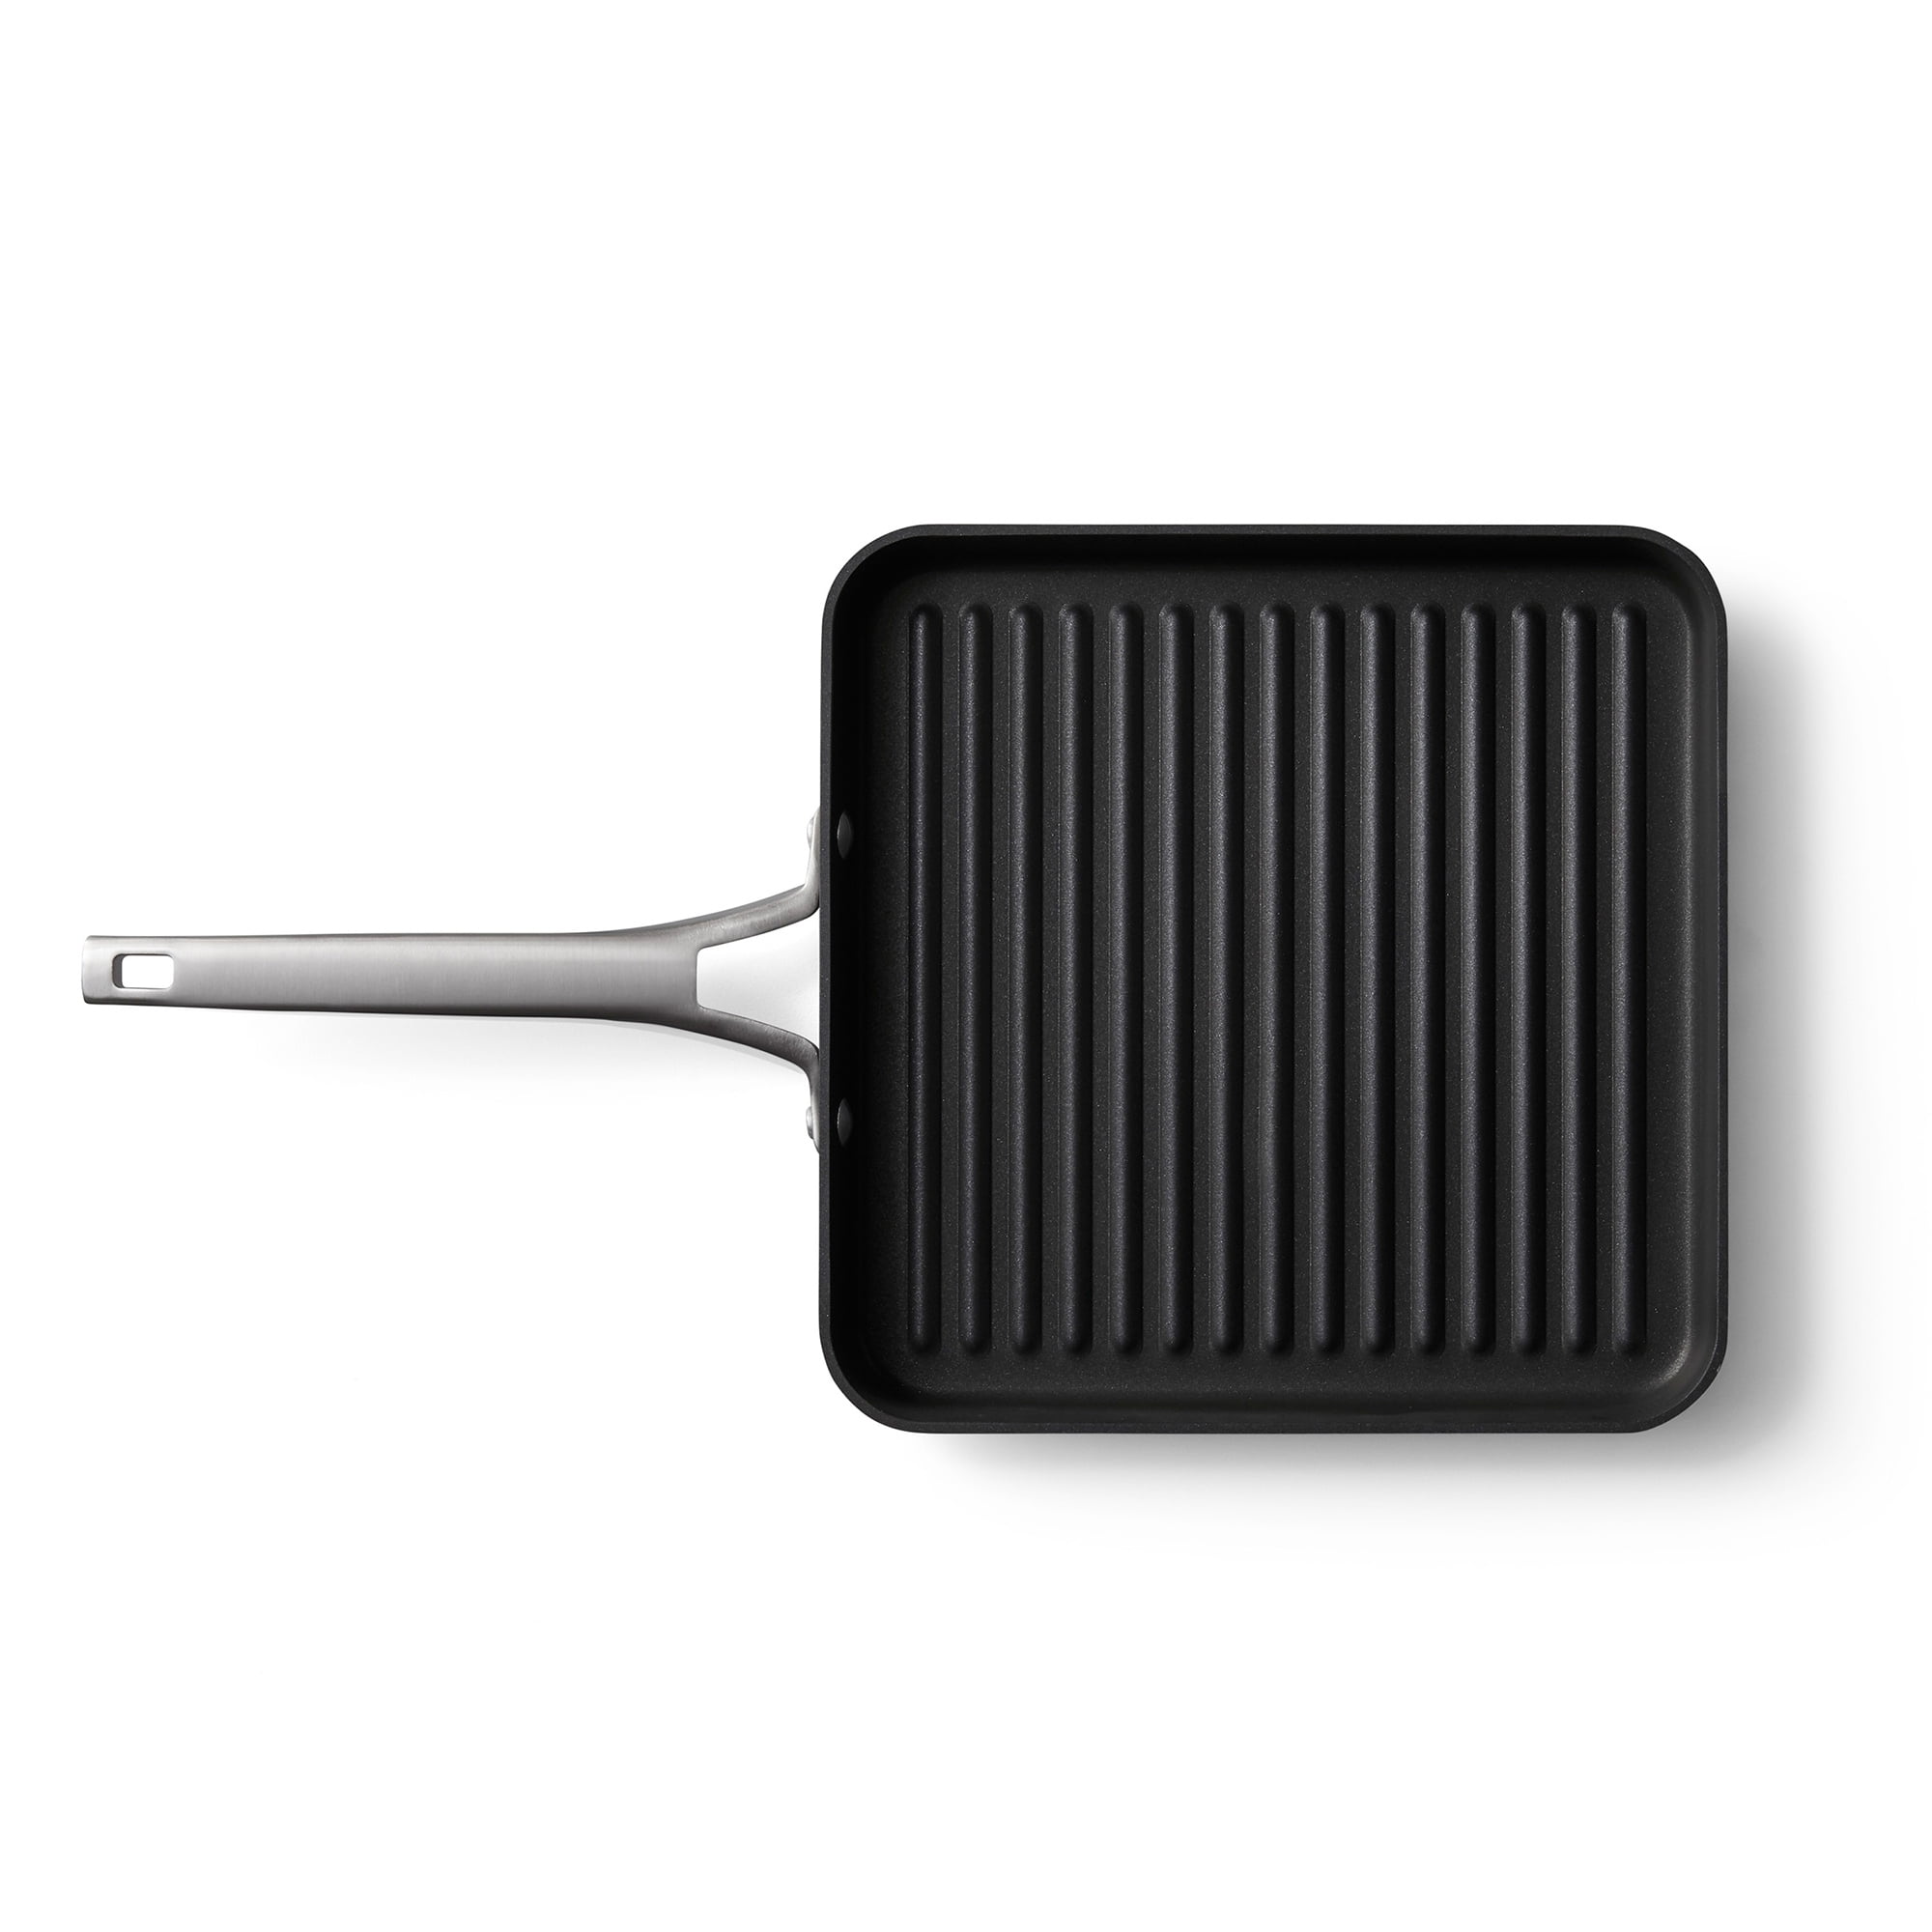 Calphalon grill pan - household items - by owner - housewares sale -  craigslist